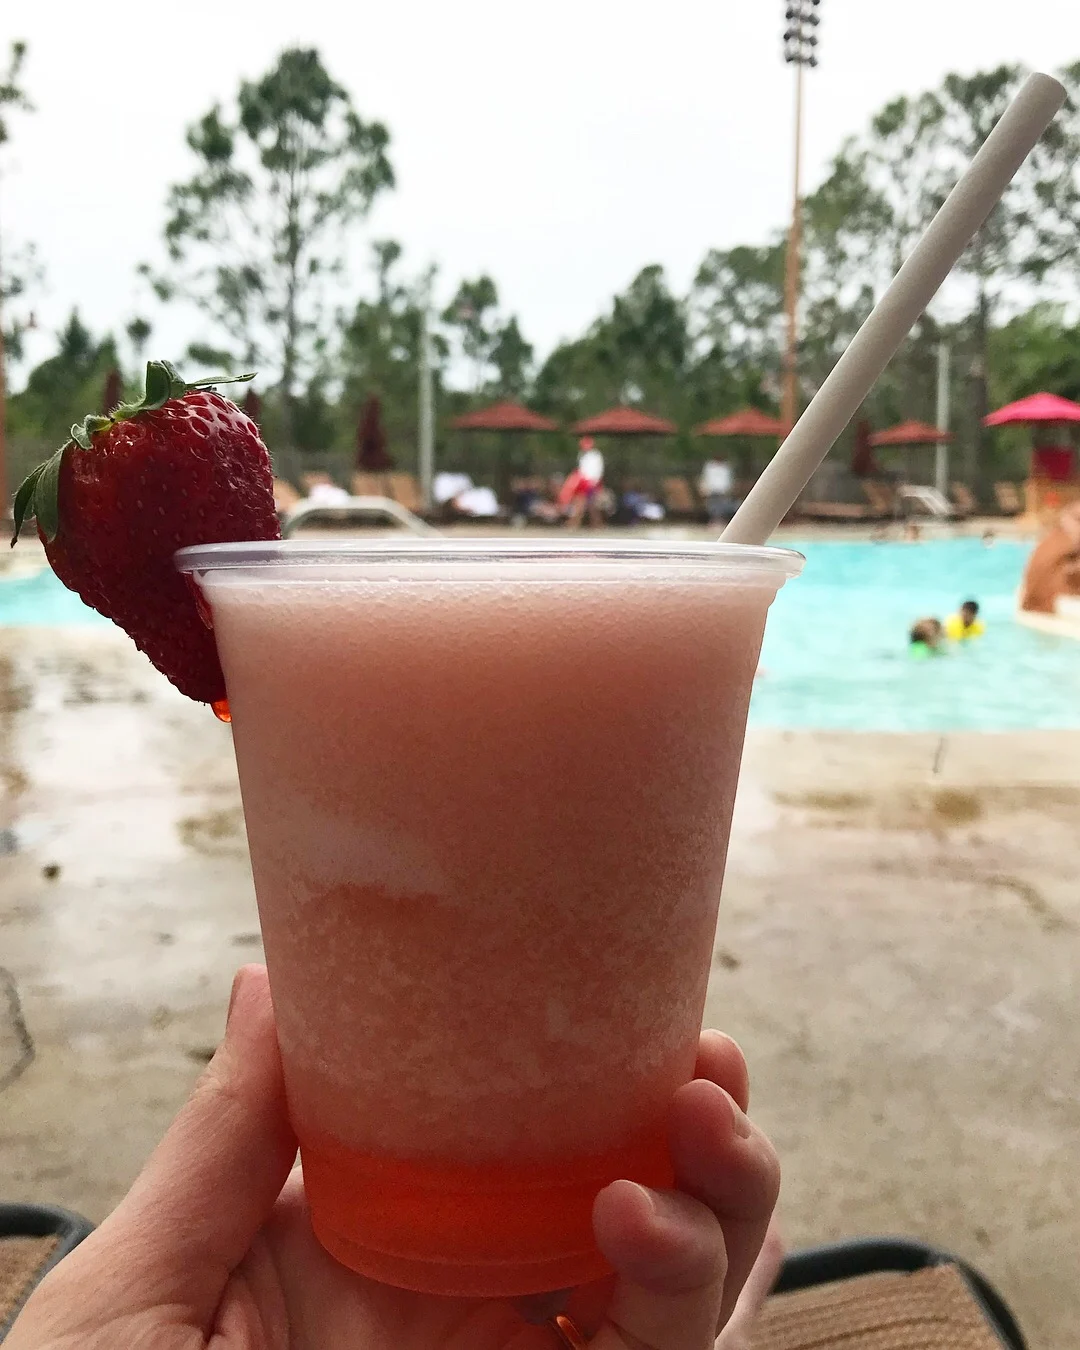 frozen drink by the pool in march